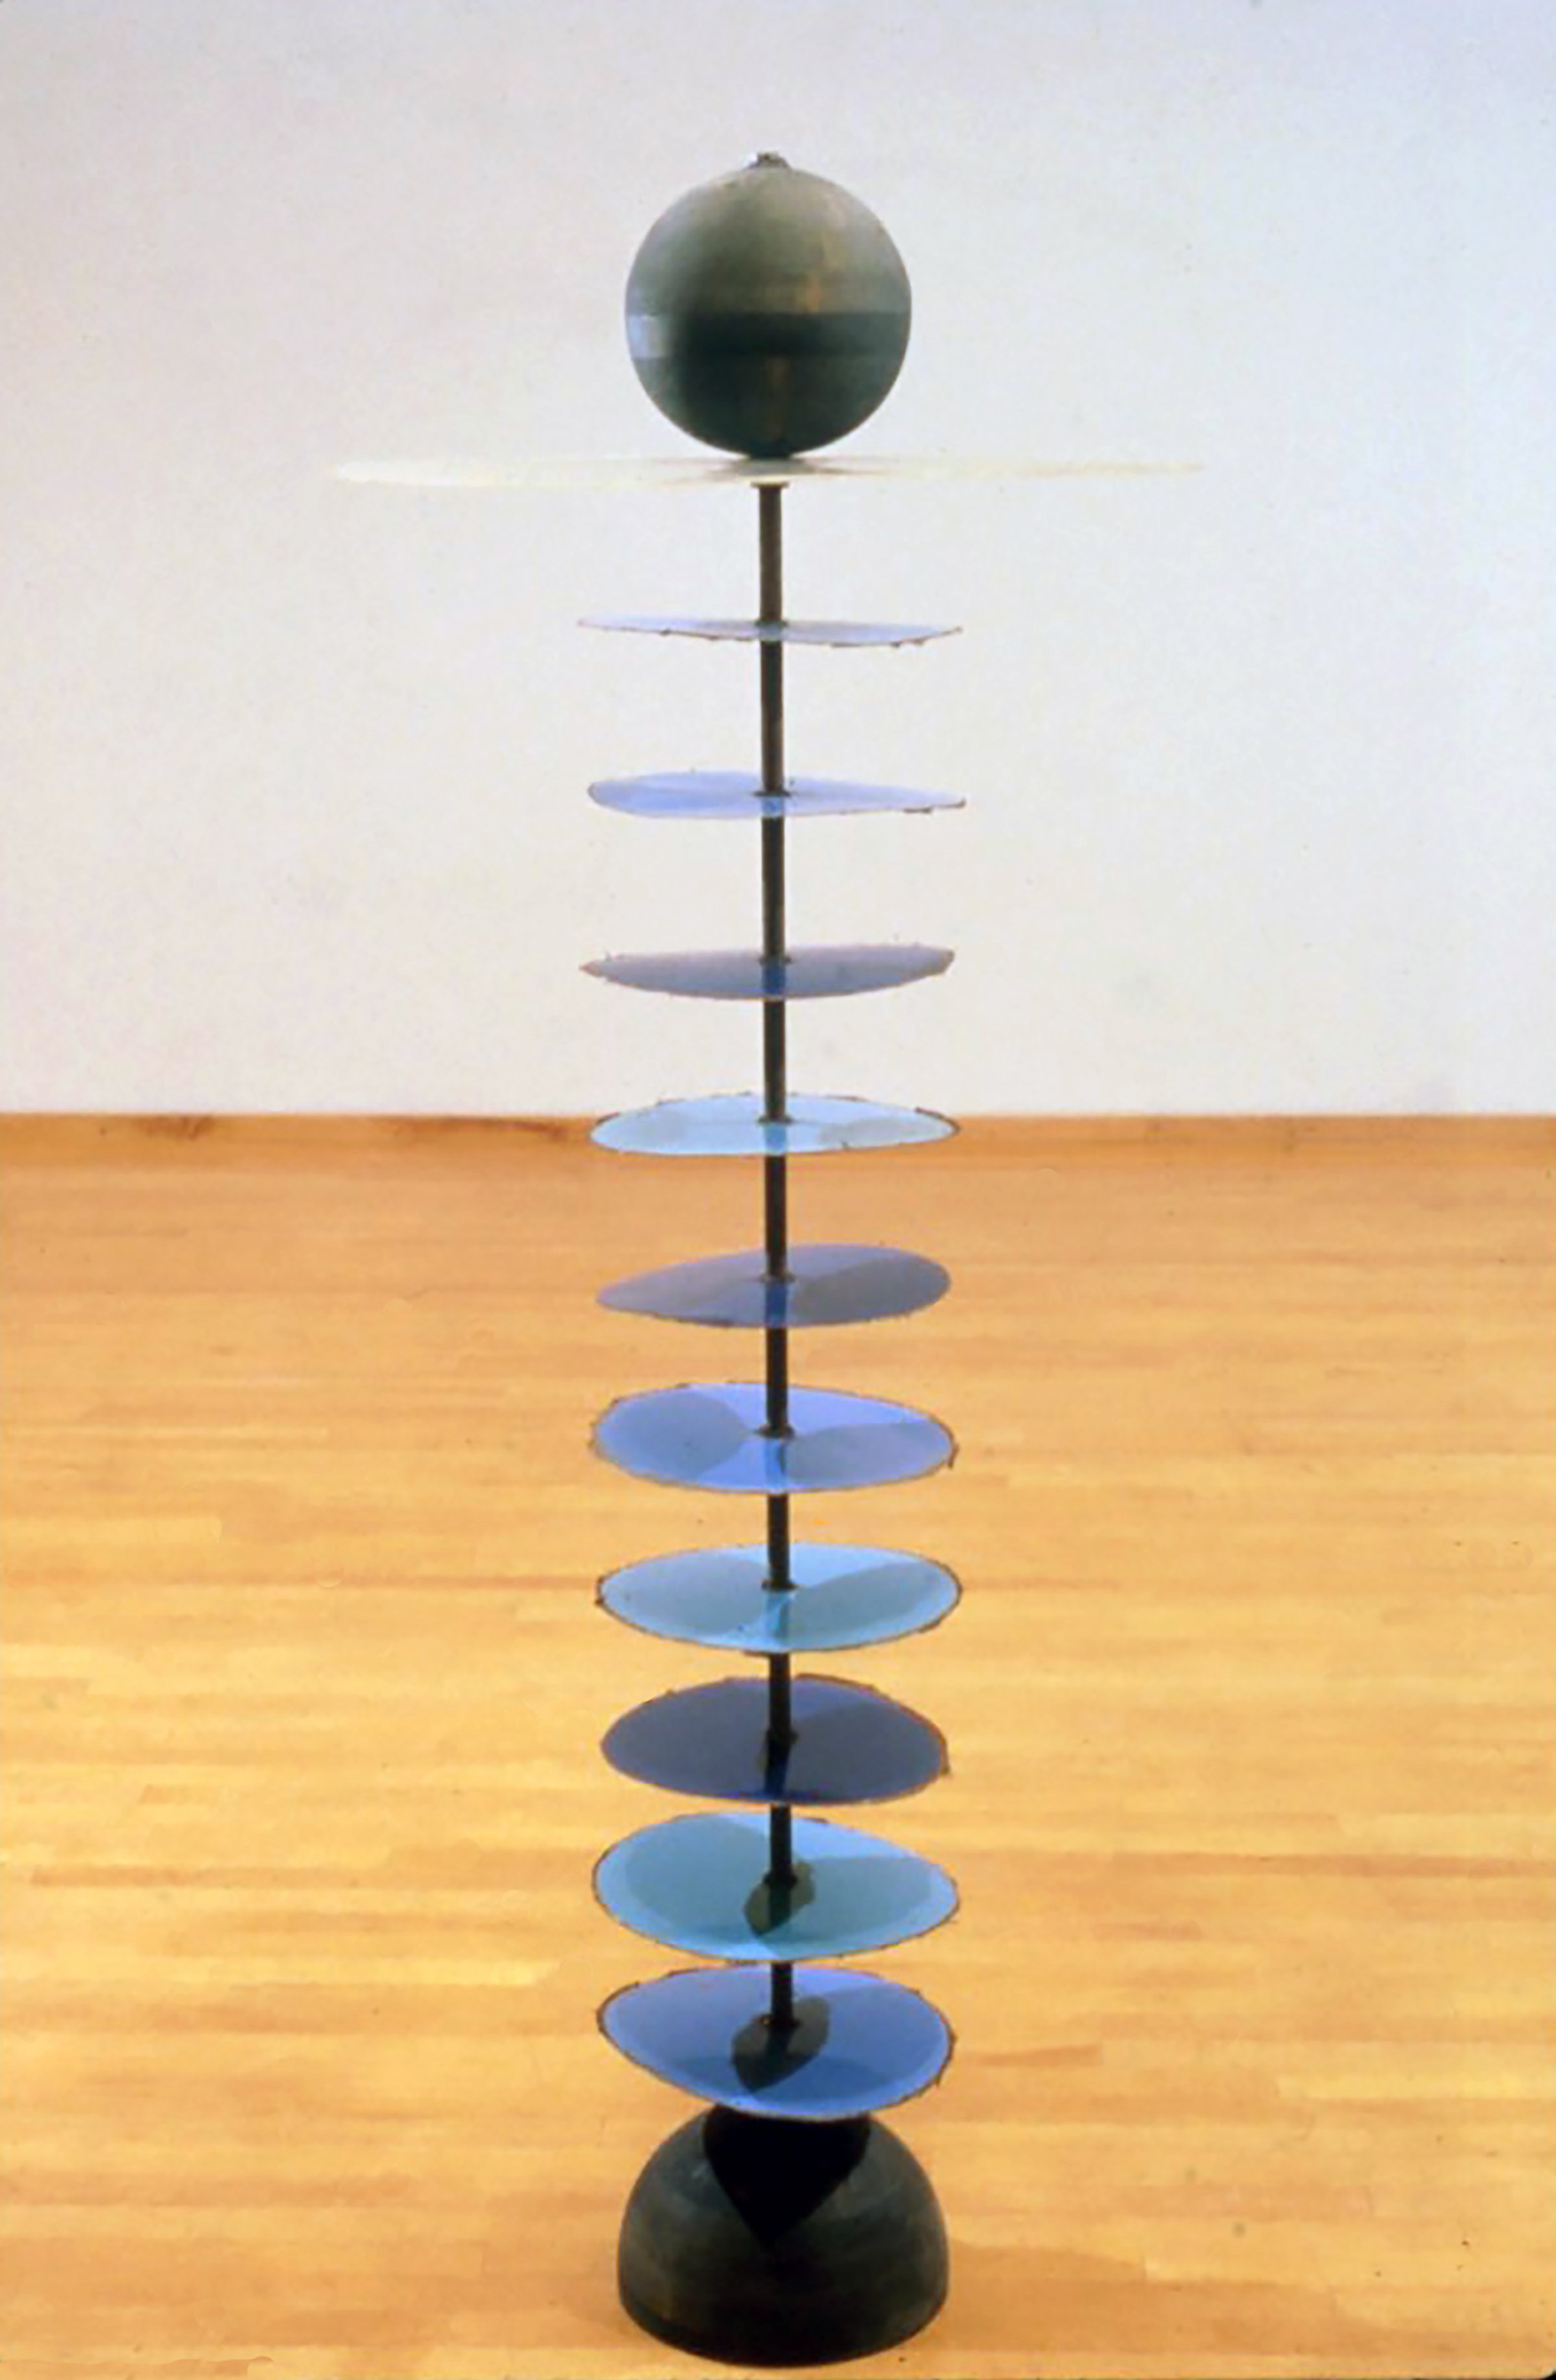  Head Spin, 1993, fiberglass resin, steel and wood  In Head Spin, a series of metal disks strung along a human-sized metal spine is topped with a large fiberglass plate that proffers a featureless wooden head as if it were John the Baptist’s on Salom